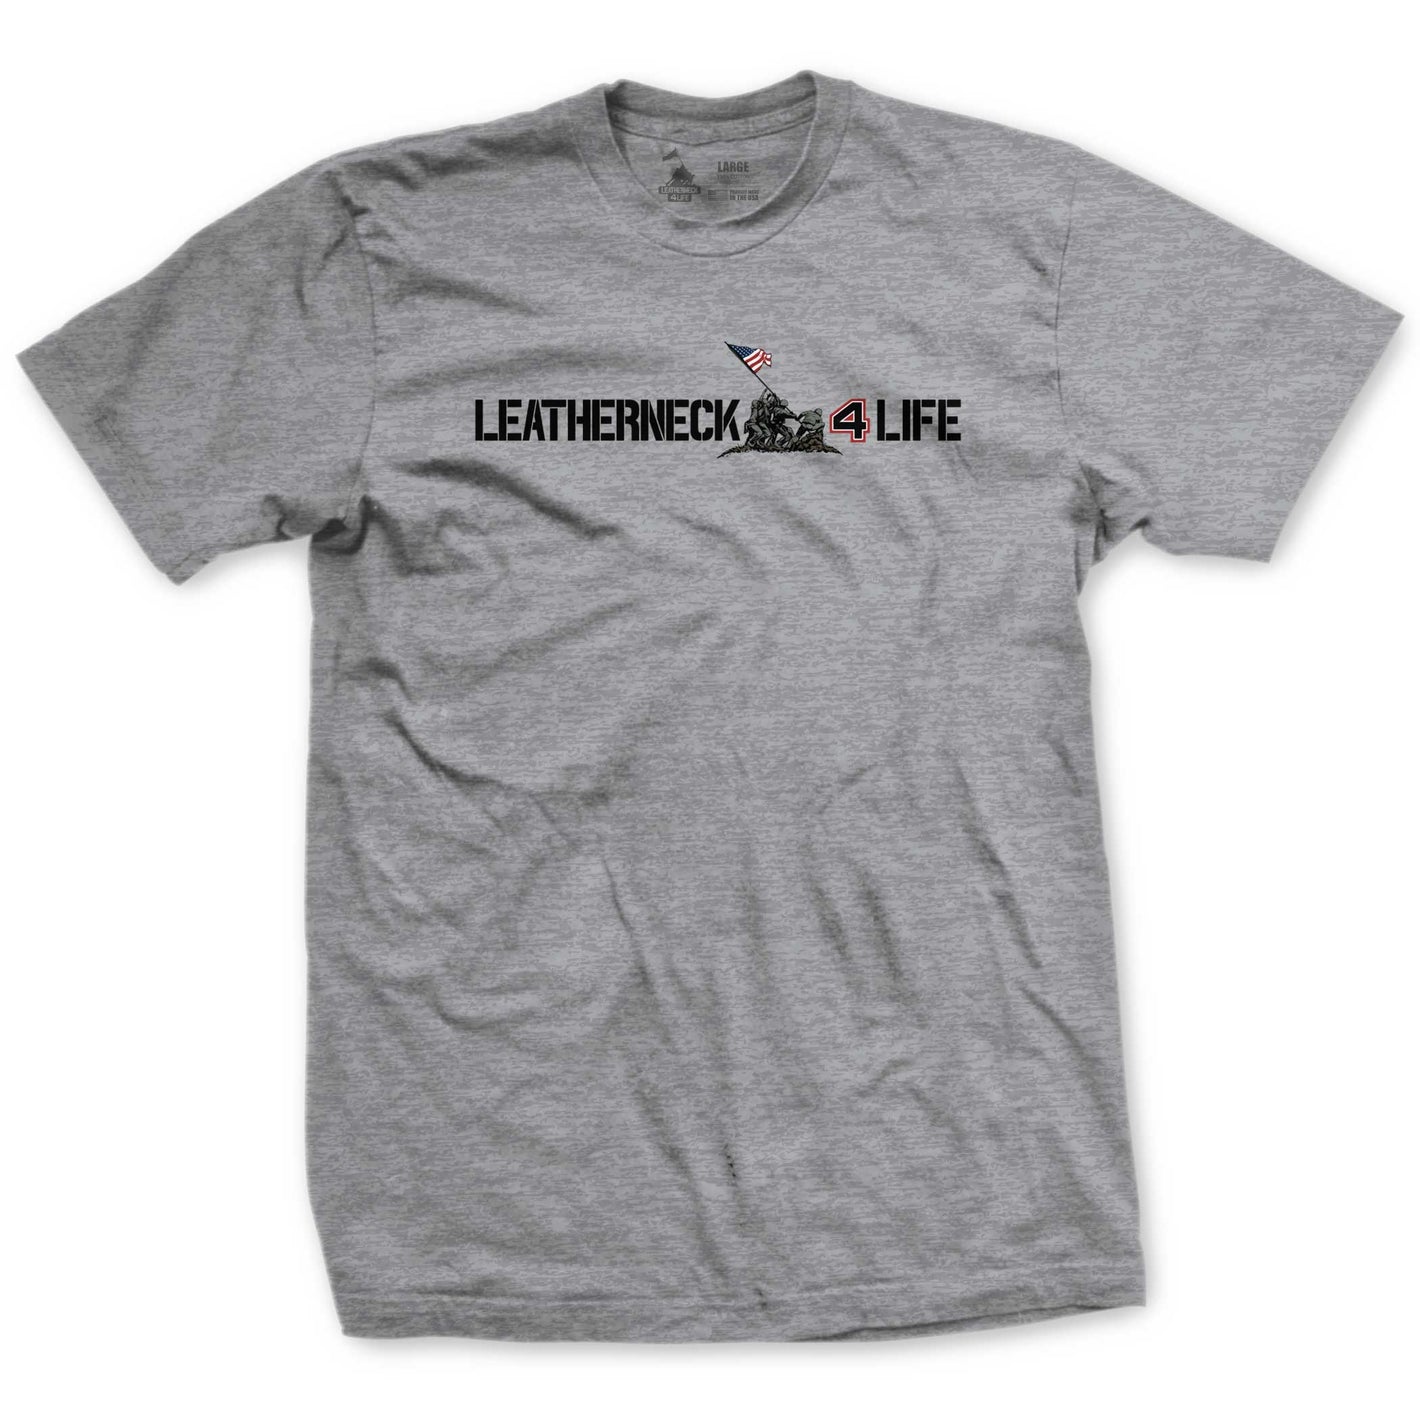 The Leatherneck For Life Logo T-Shirt